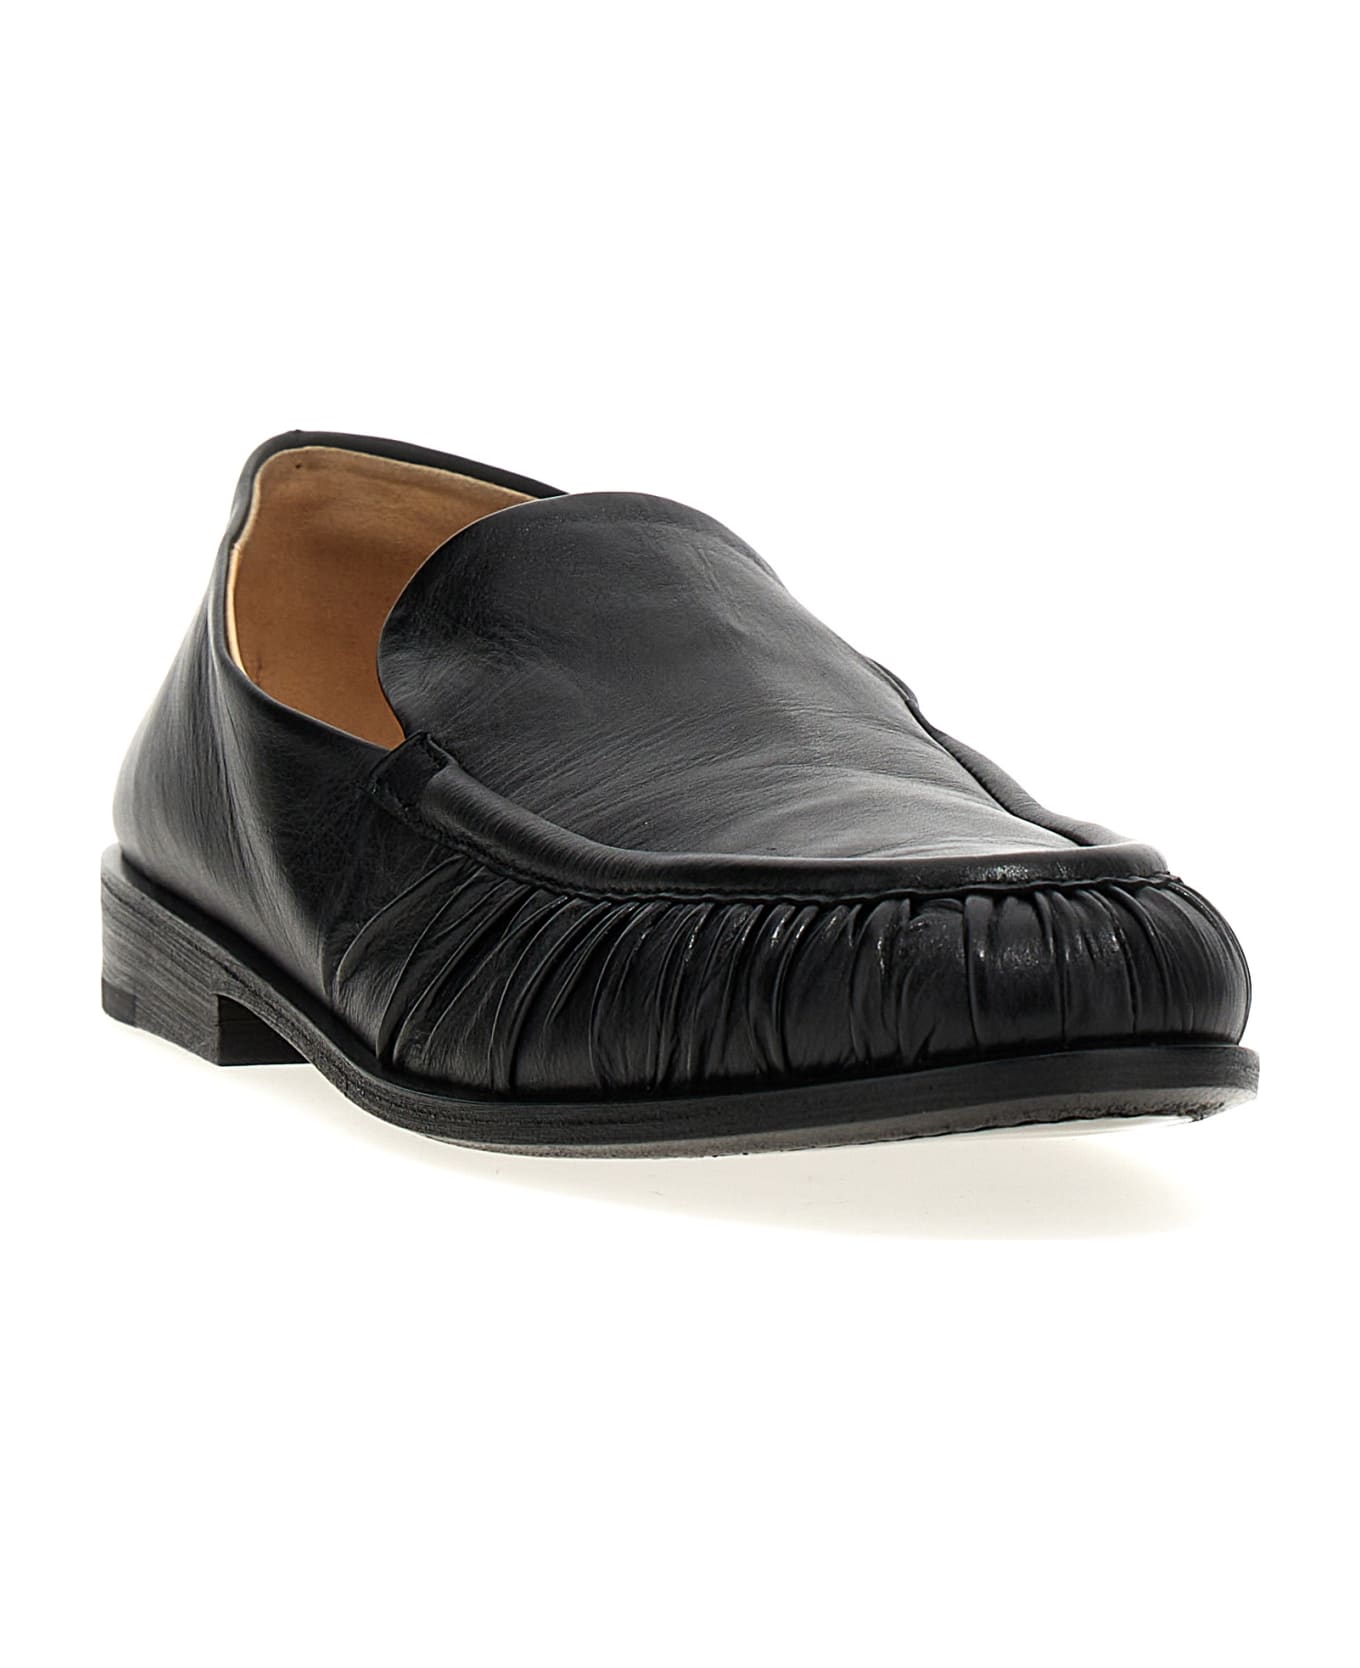 Marsell 'mocassino' Loafers - Black  